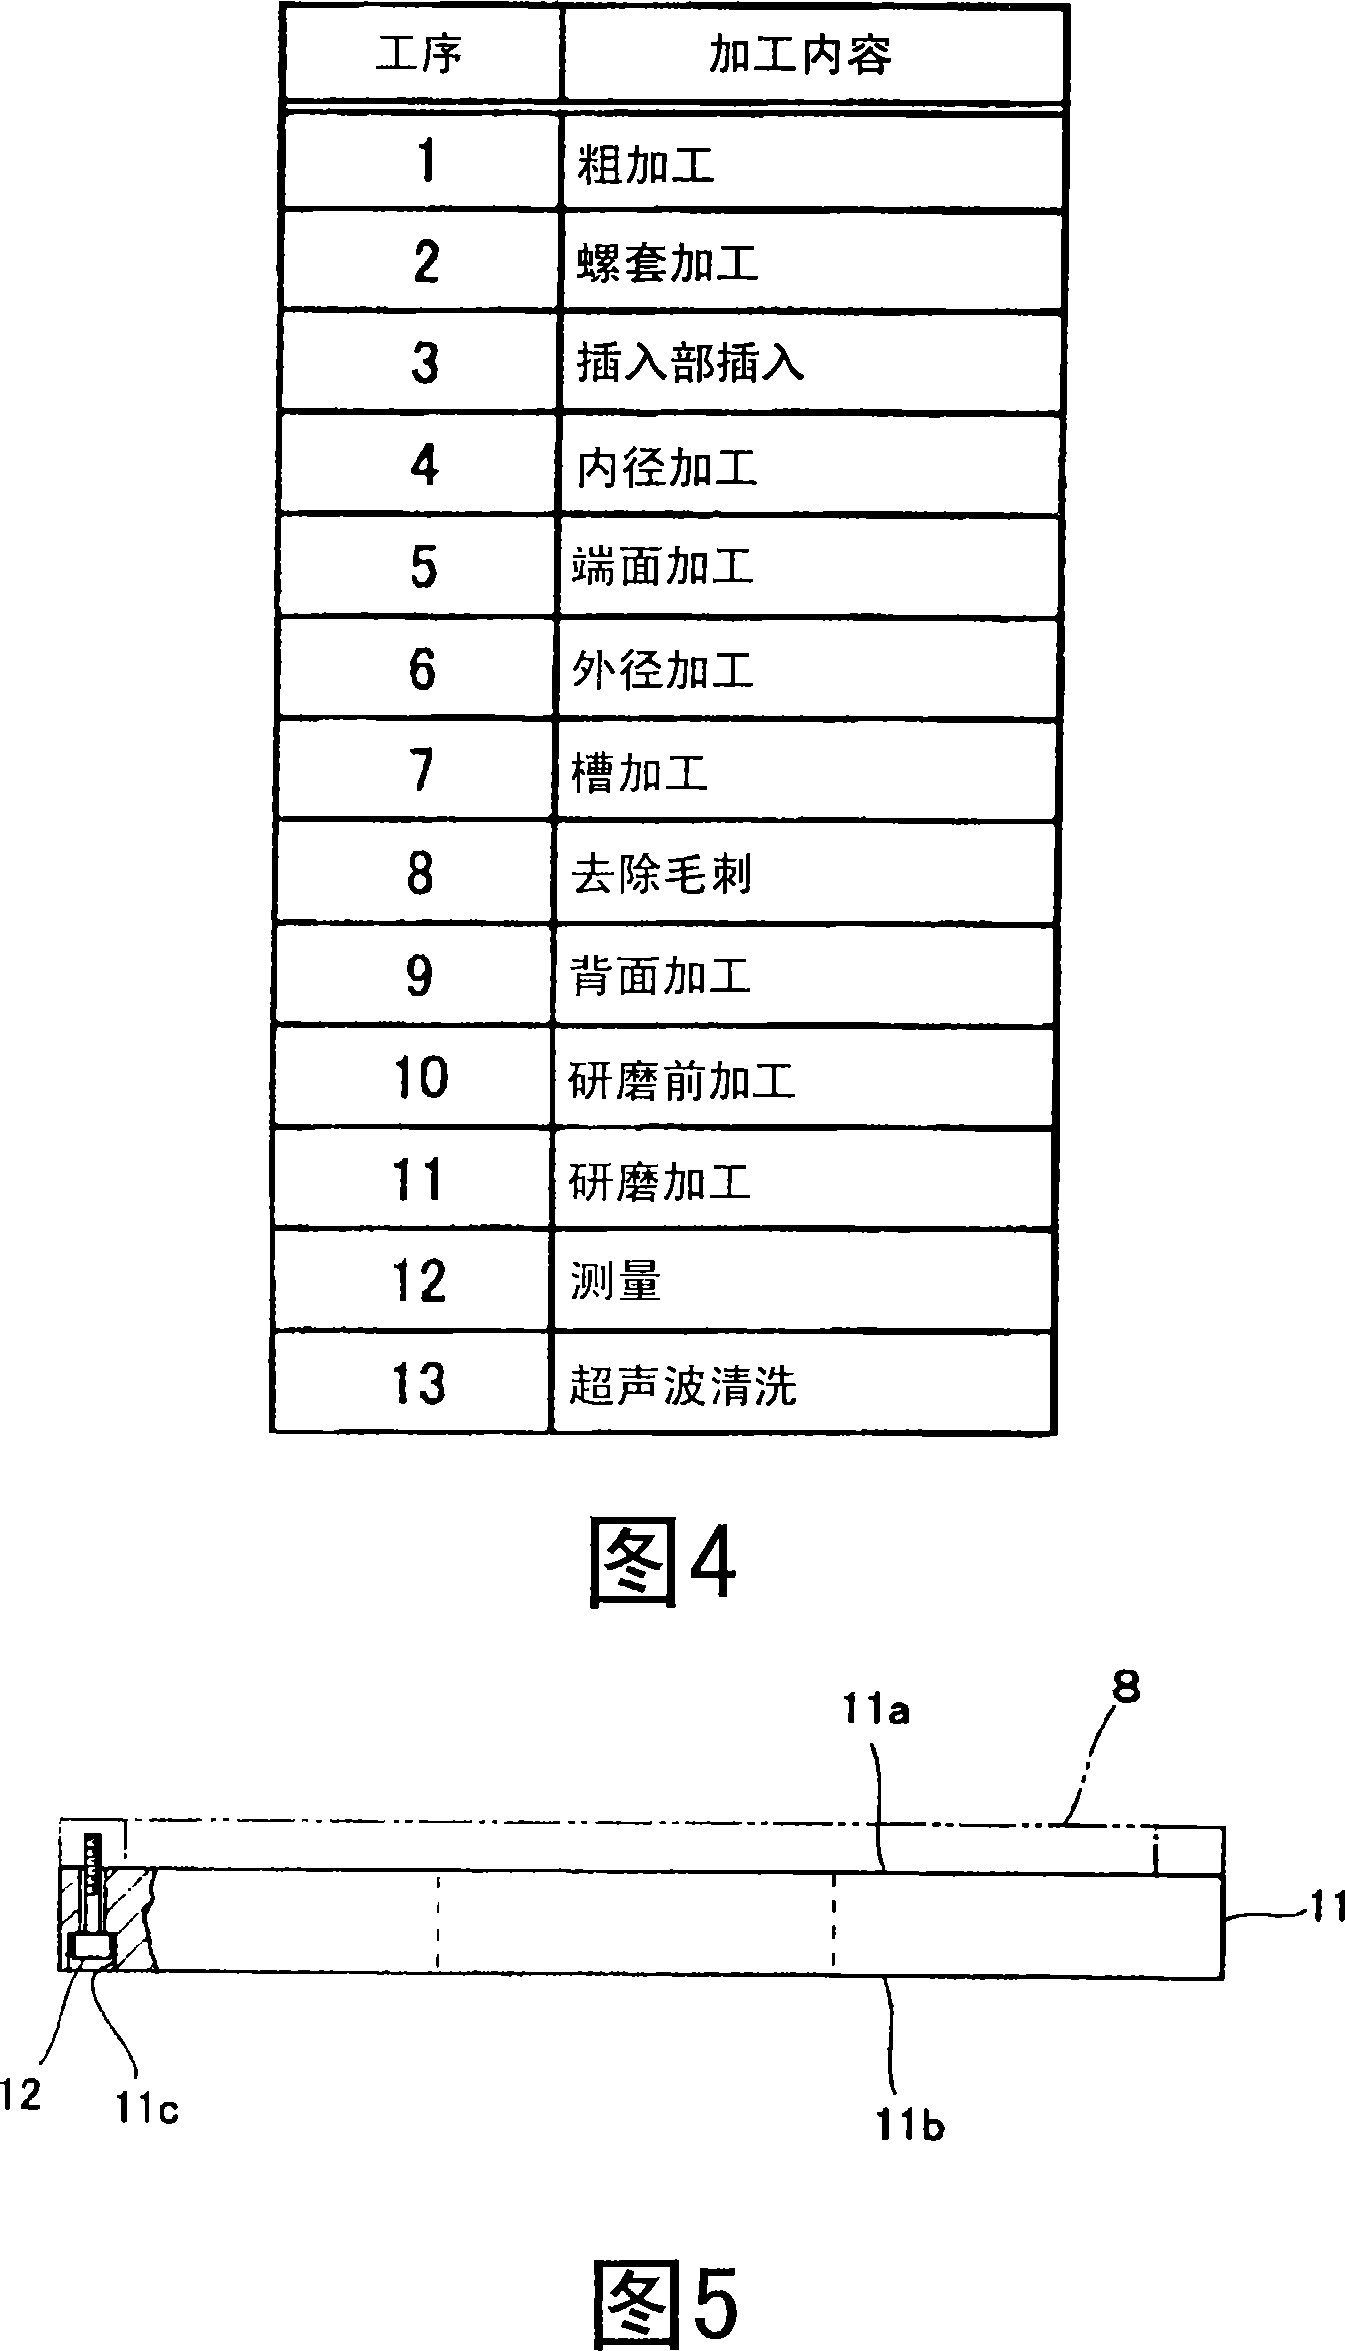 Retainer ring for CMP device, method of manufacturing the same, and CMP device